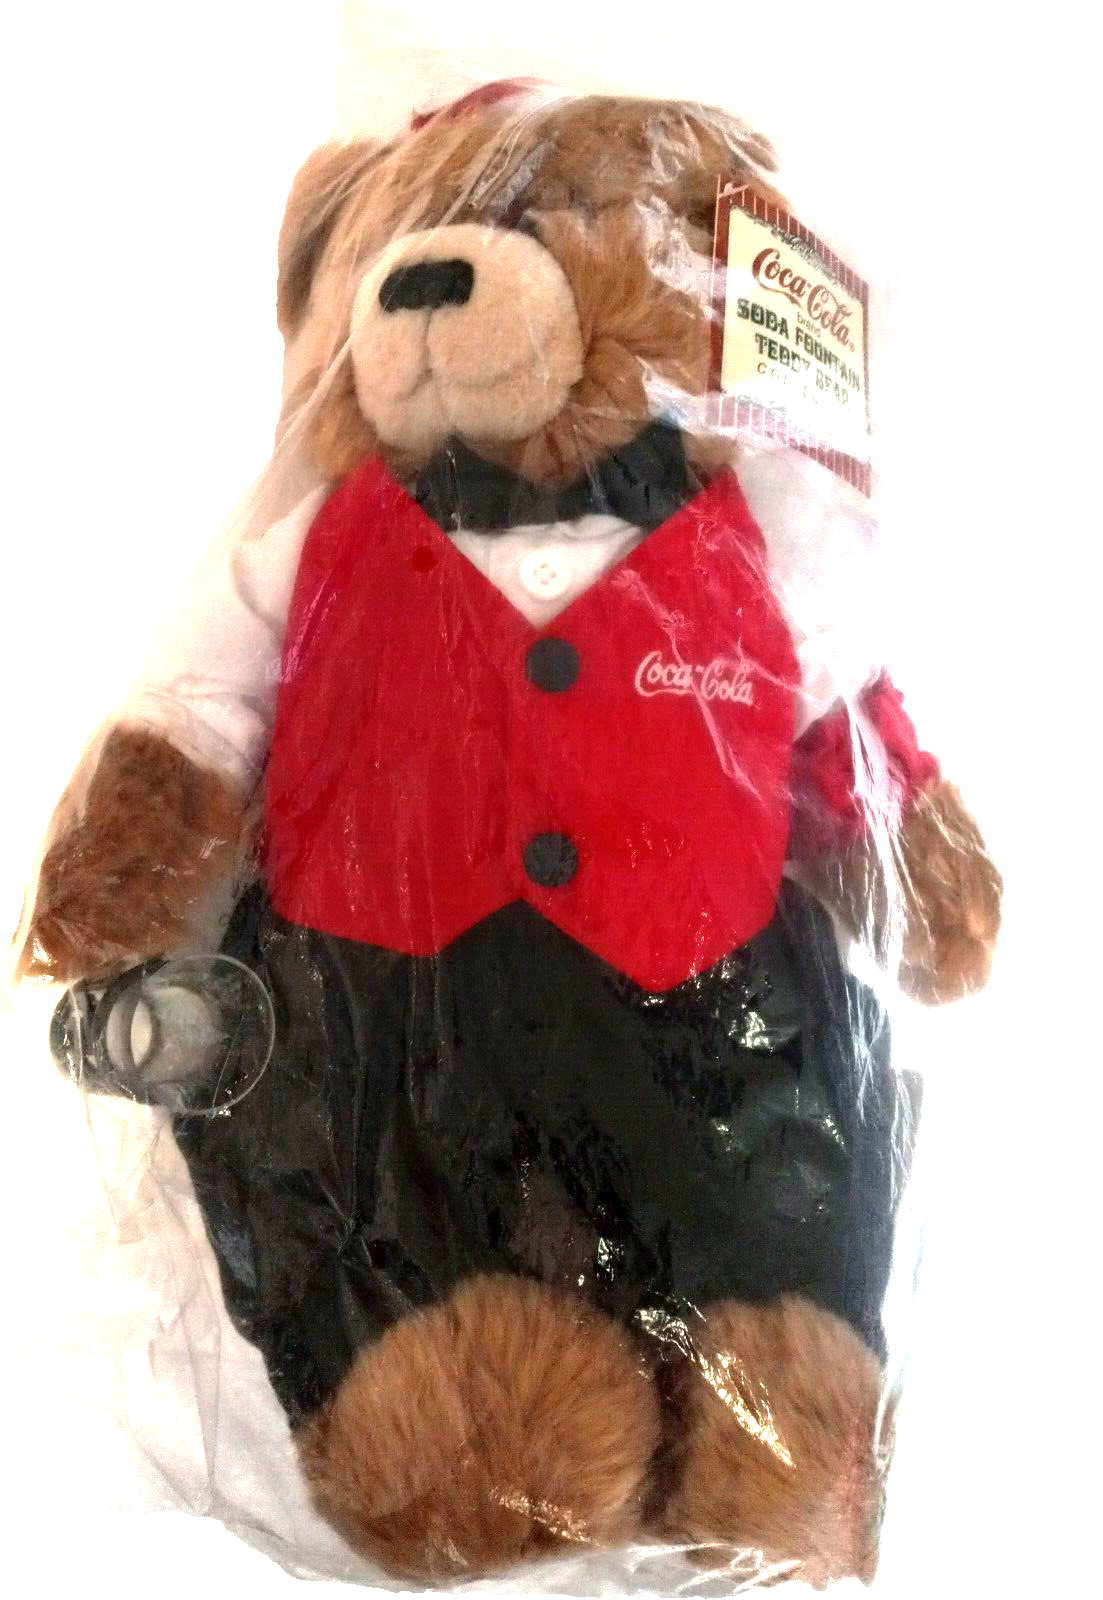 Coca Cola Soda Fountain Teddy Bear Hubeart 1999 Unopened With Certificate